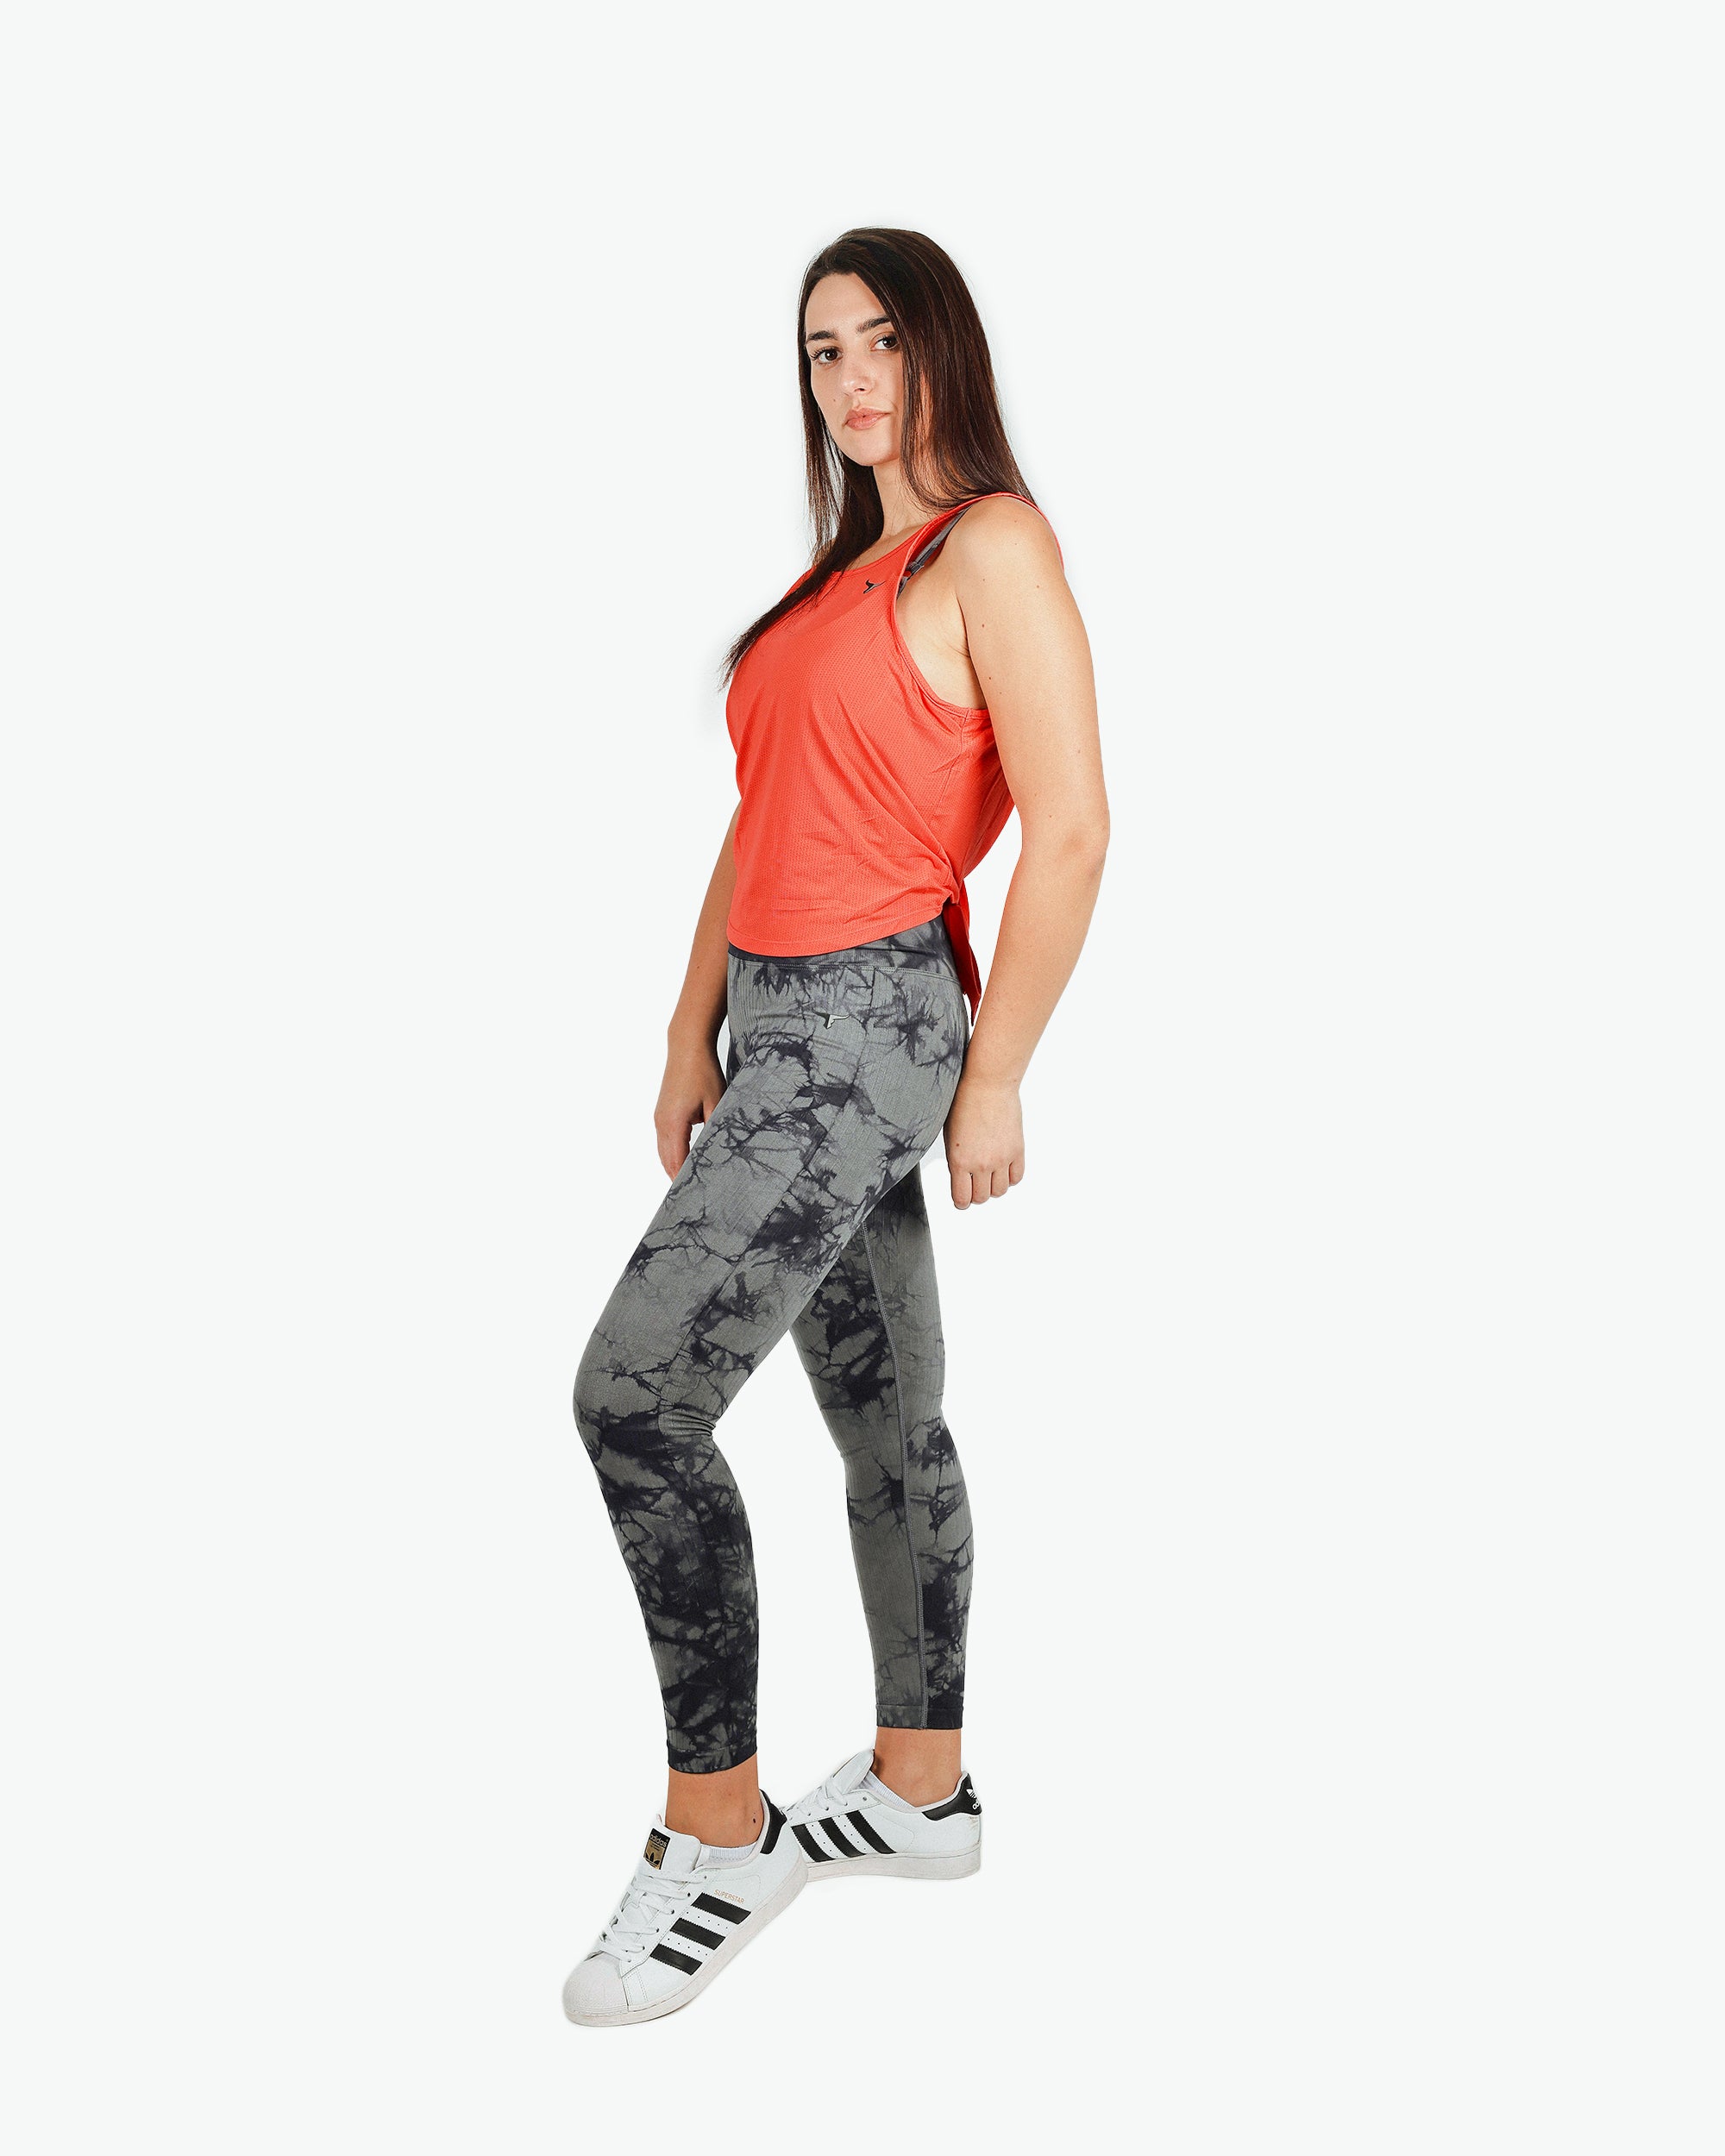 BreezyBack Tie back Tank Top & FunkyHues Fitness Leggings Combo - THUGFIT